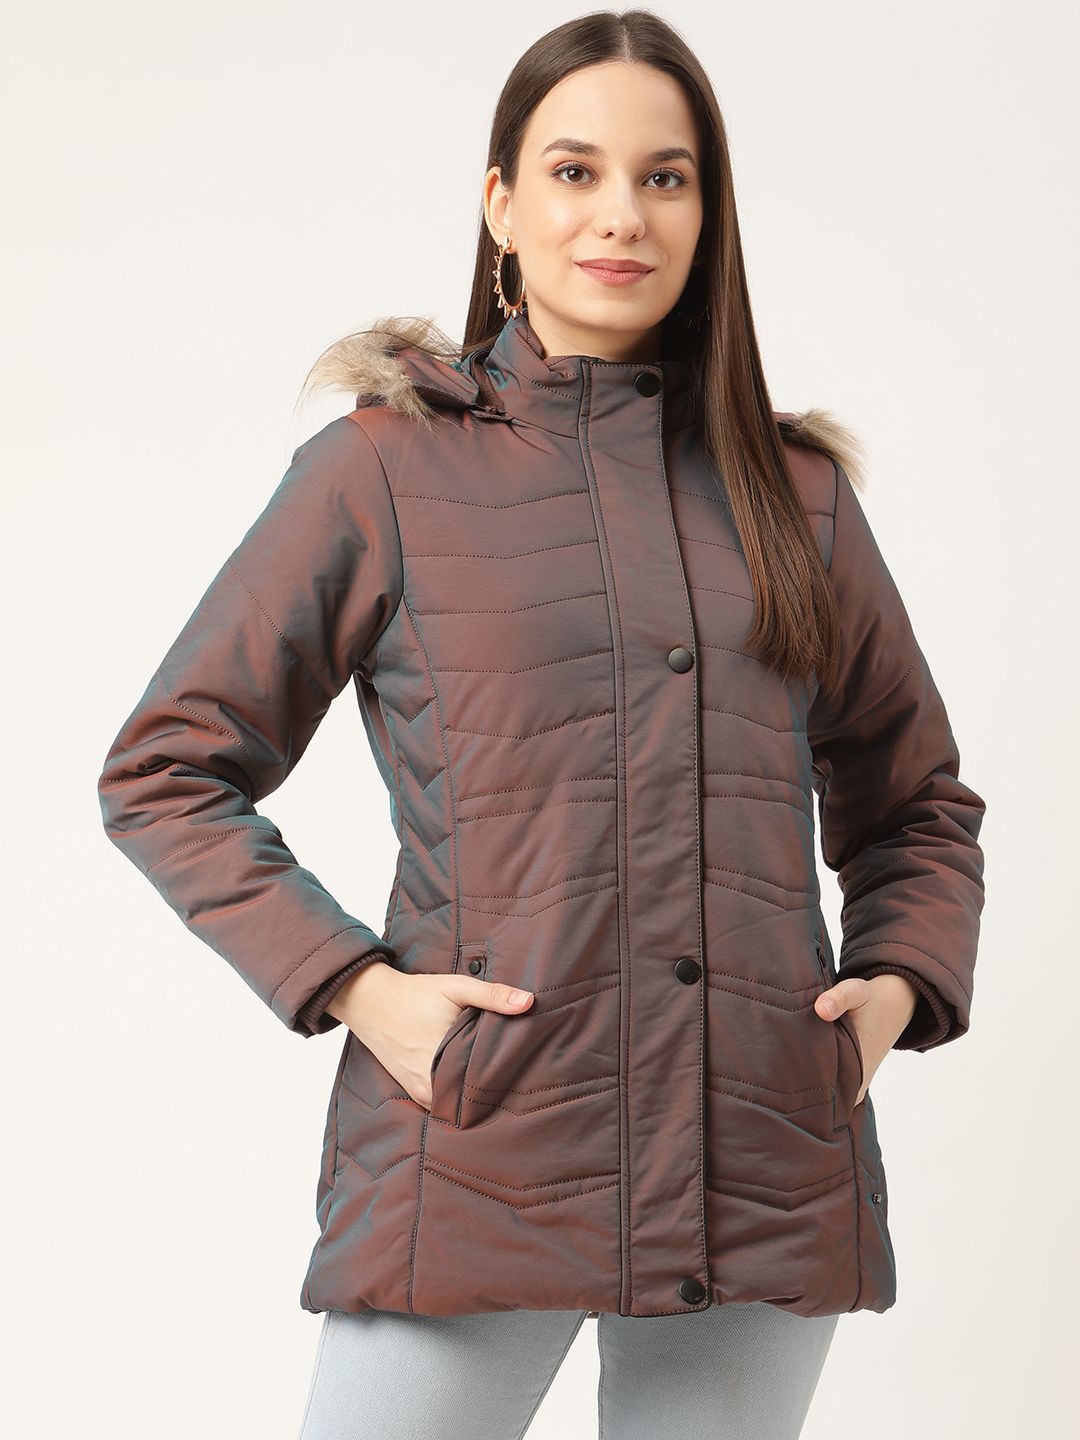 Duke Women Brown & Blue Dual-Toned Parka Jacket with Detachable Hood Price in India